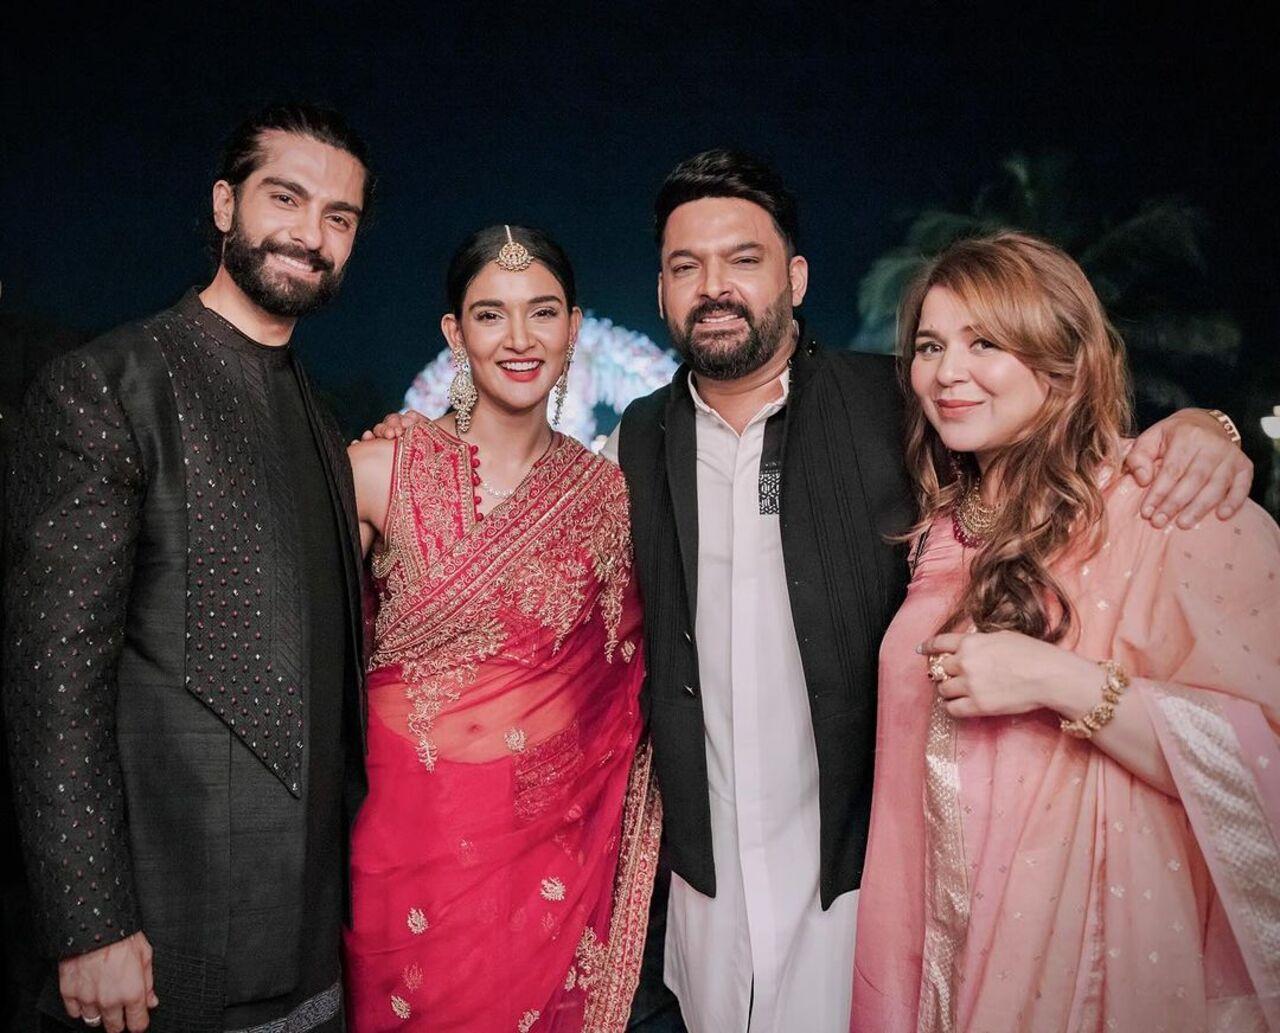 Comedian Kapil Sharma along with his wife Ginni Chatrath also attended the wedding 